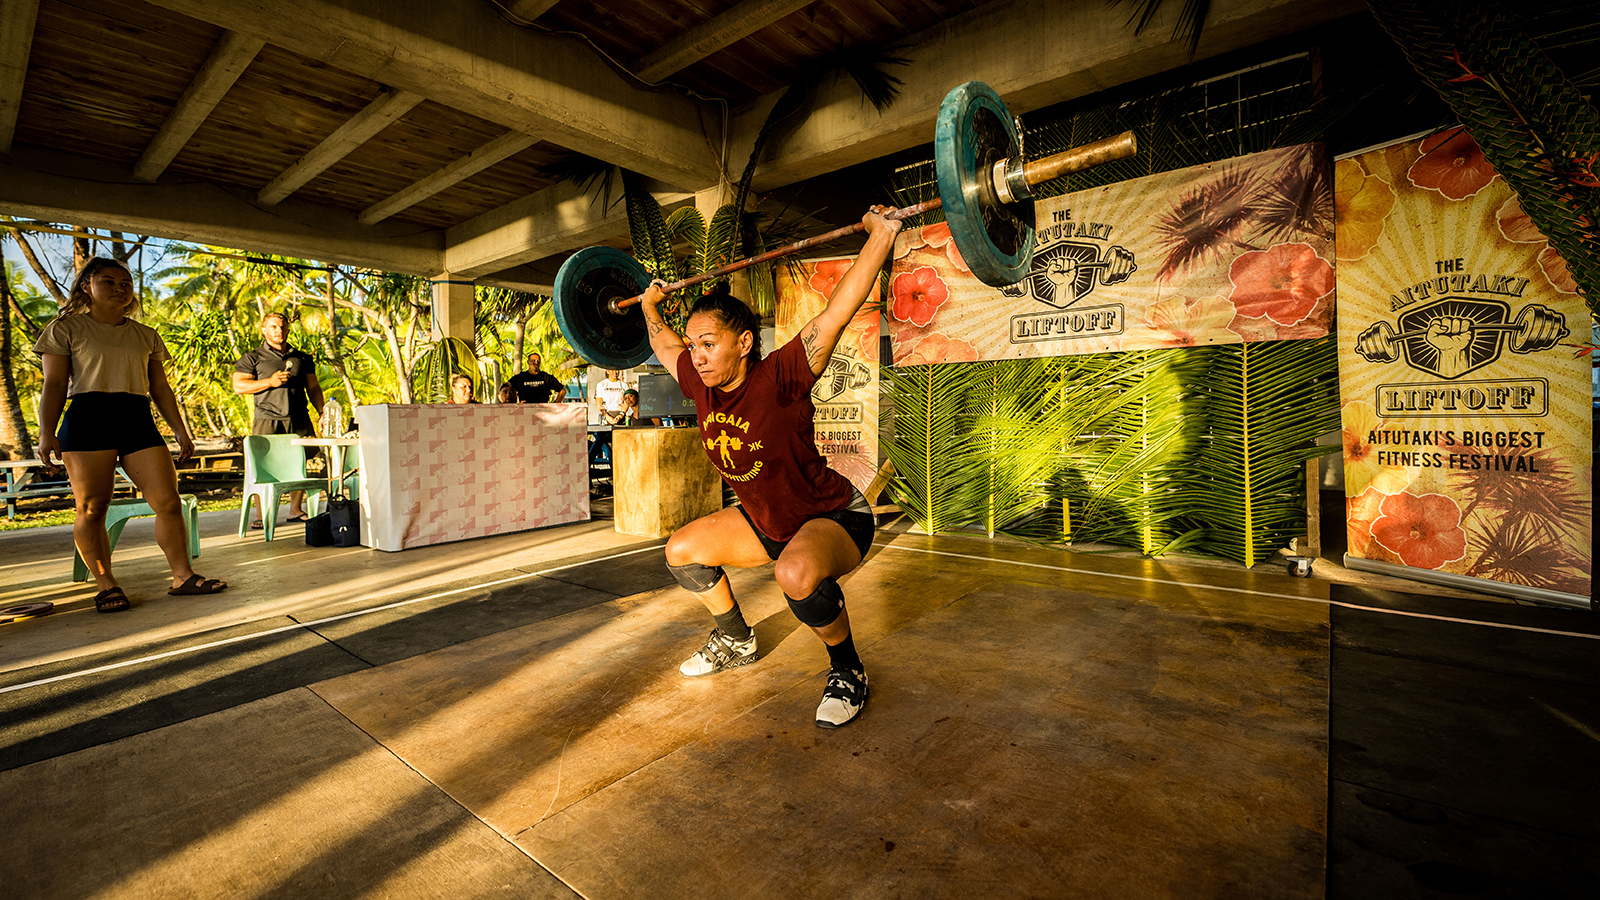 Aitutaki Liftoff aims to become South Pacific’s biggest fitness festival